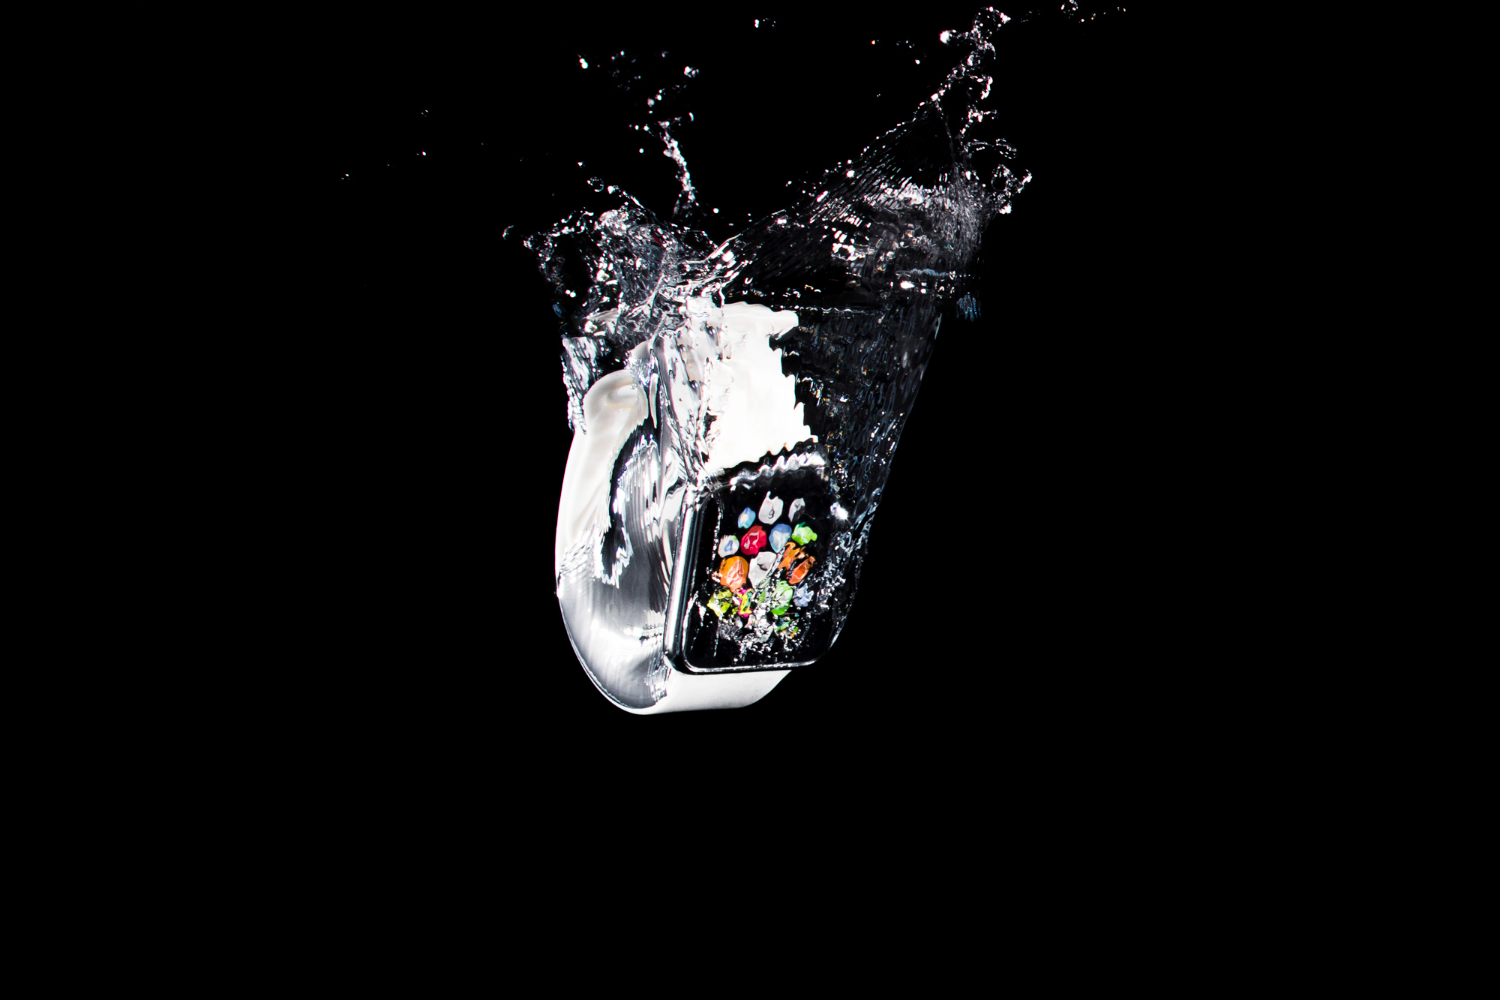 A Visual Journey through Watch Photography